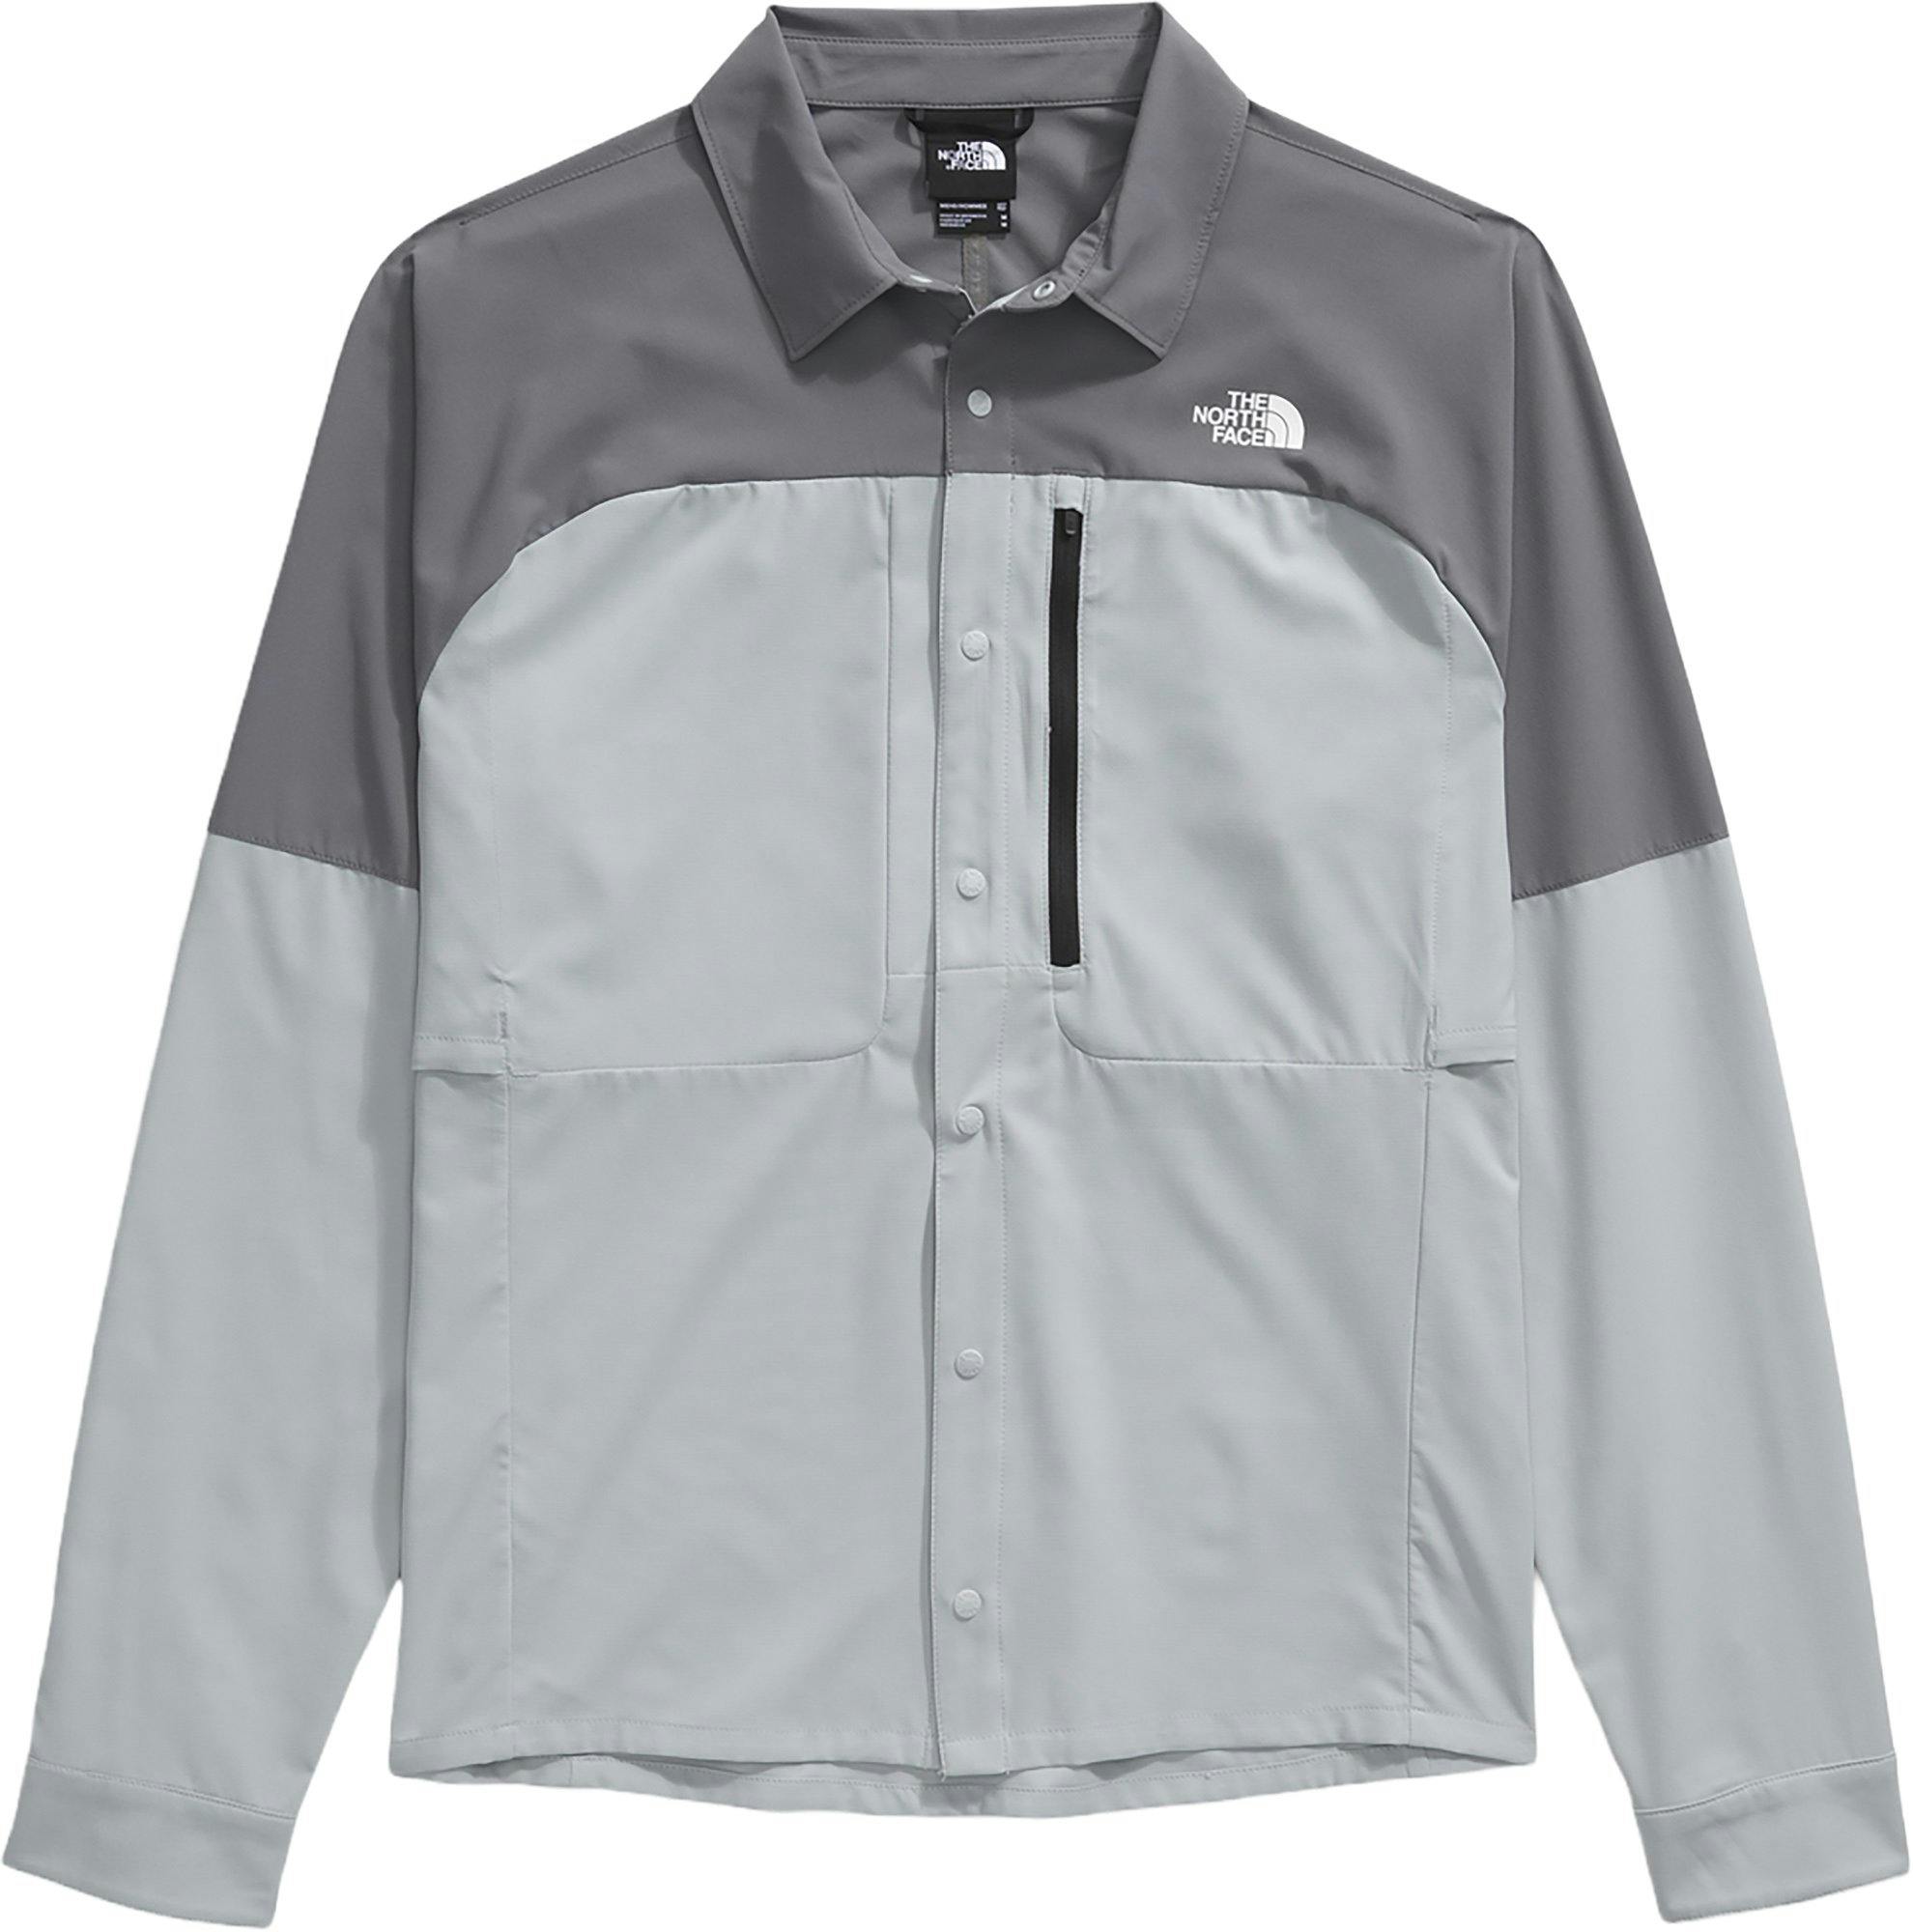 Product image for First Trail UPF Long Sleeve Shirt - Men's